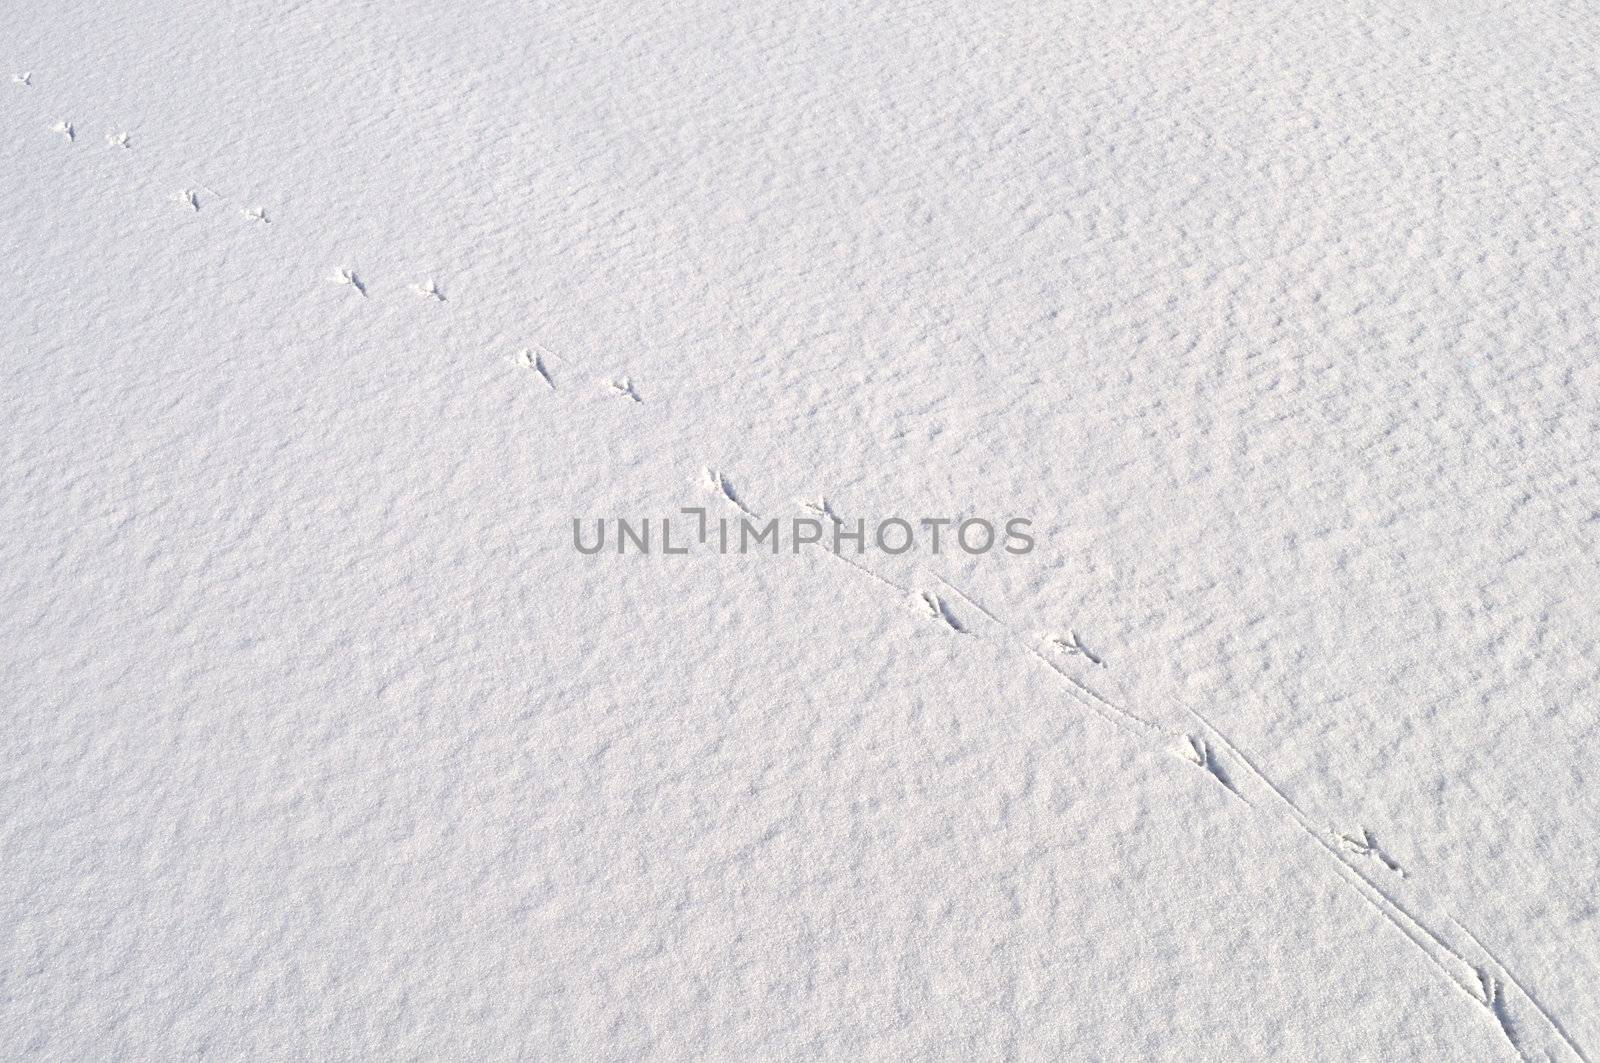 Close up of snow surface background with bird's footprints